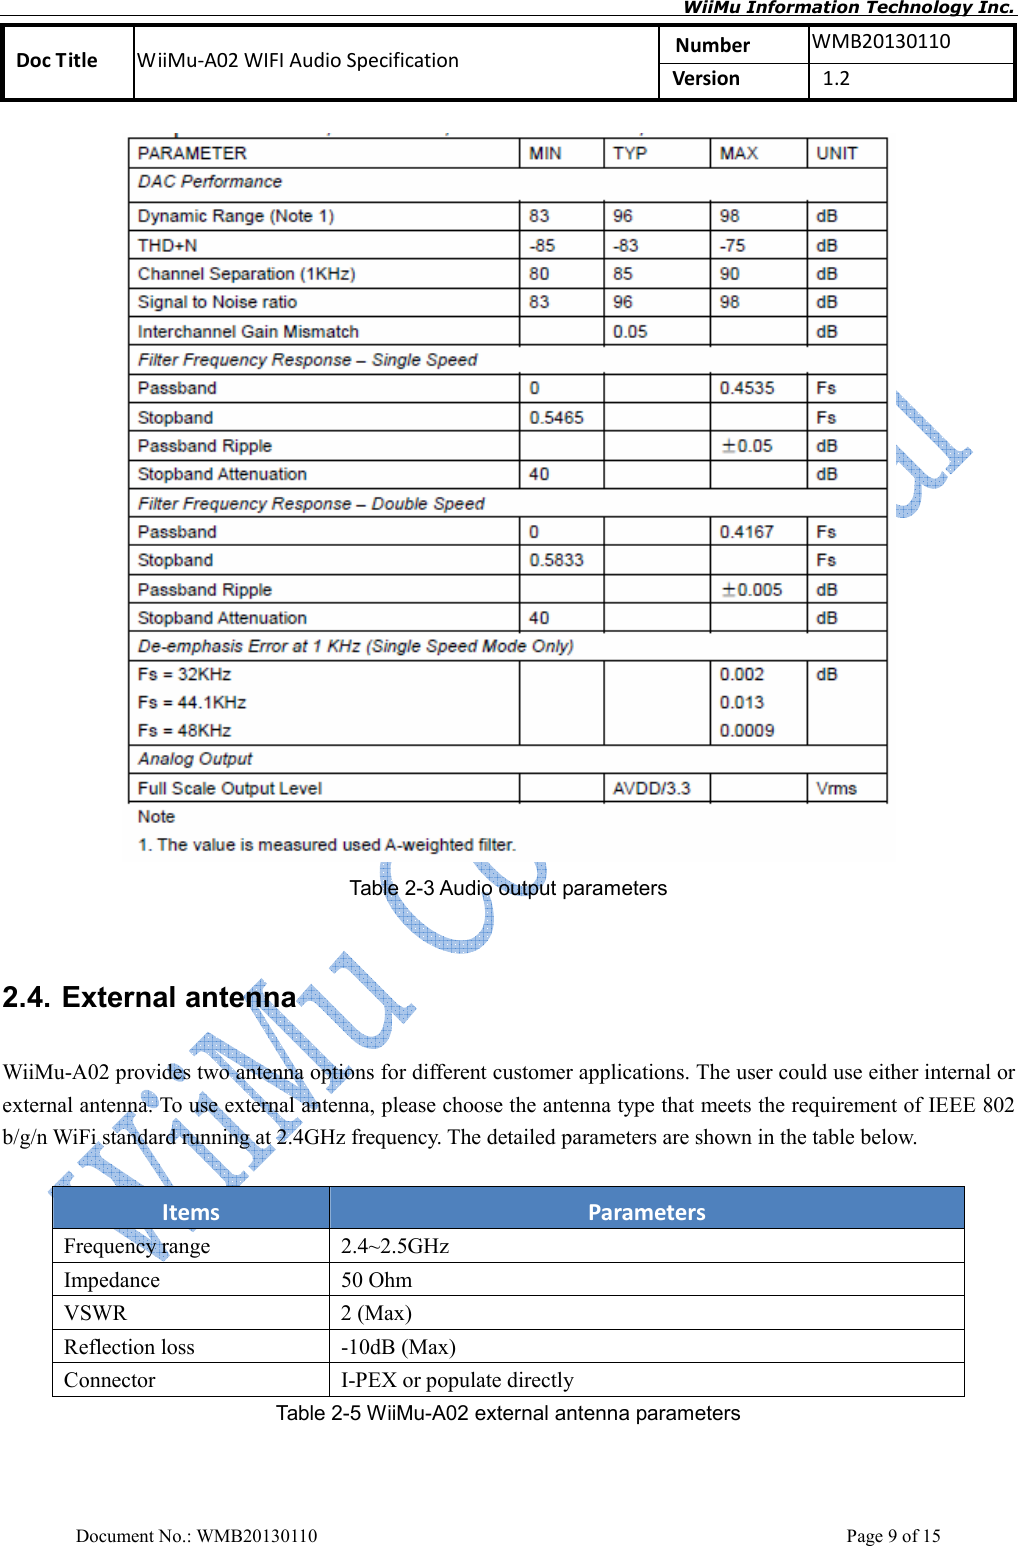       WiiMu Information Technology Inc. Number  WMB20130110 Doc Title  WiiMu-A02 WIFI Audio Specification  Version    1.2  Document No.: WMB20130110    Page 9 of 15  Table 2-3 Audio output parameters  2.4. External antenna WiiMu-A02 provides two antenna options for different customer applications. The user could use either internal or external antenna. To use external antenna, please choose the antenna type that meets the requirement of IEEE 802 b/g/n WiFi standard running at 2.4GHz frequency. The detailed parameters are shown in the table below.            Items  Parameters Frequency range  2.4~2.5GHz Impedance  50 Ohm VSWR  2 (Max) Reflection loss  -10dB (Max) Connector  I-PEX or populate directly Table 2-5 WiiMu-A02 external antenna parameters  